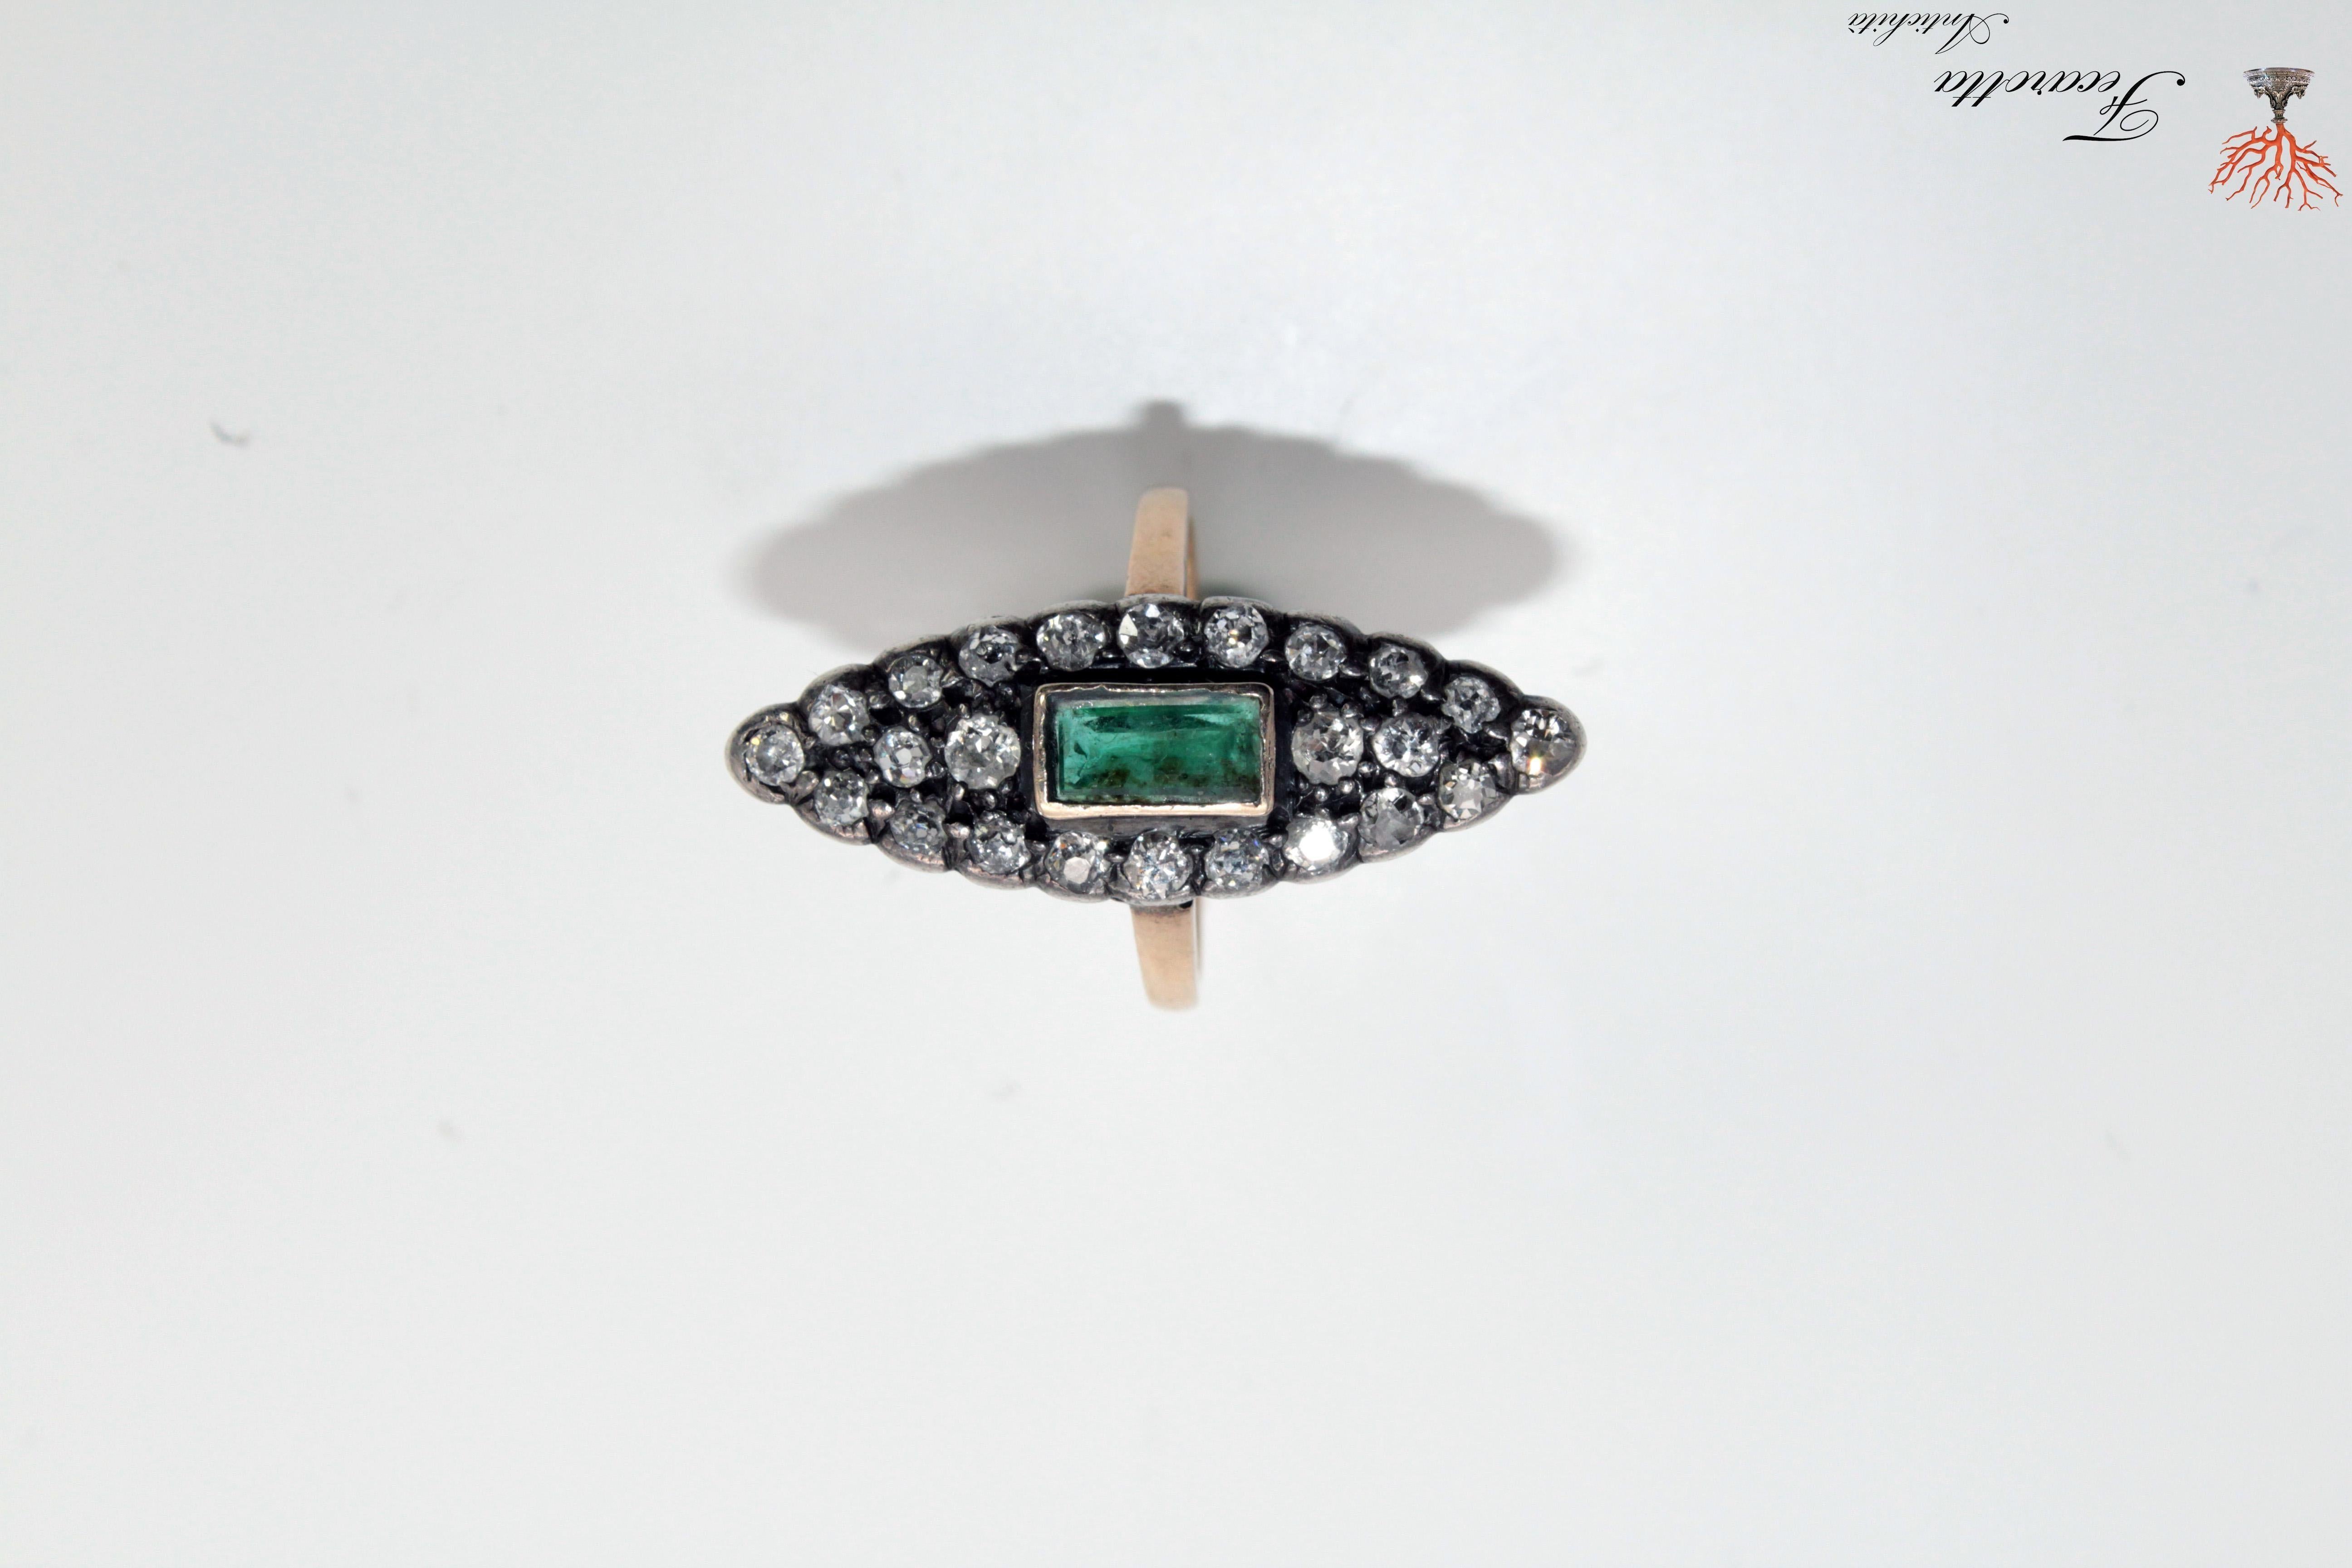 Emerald Cut Emerald and Diamonds Cocktail Ring